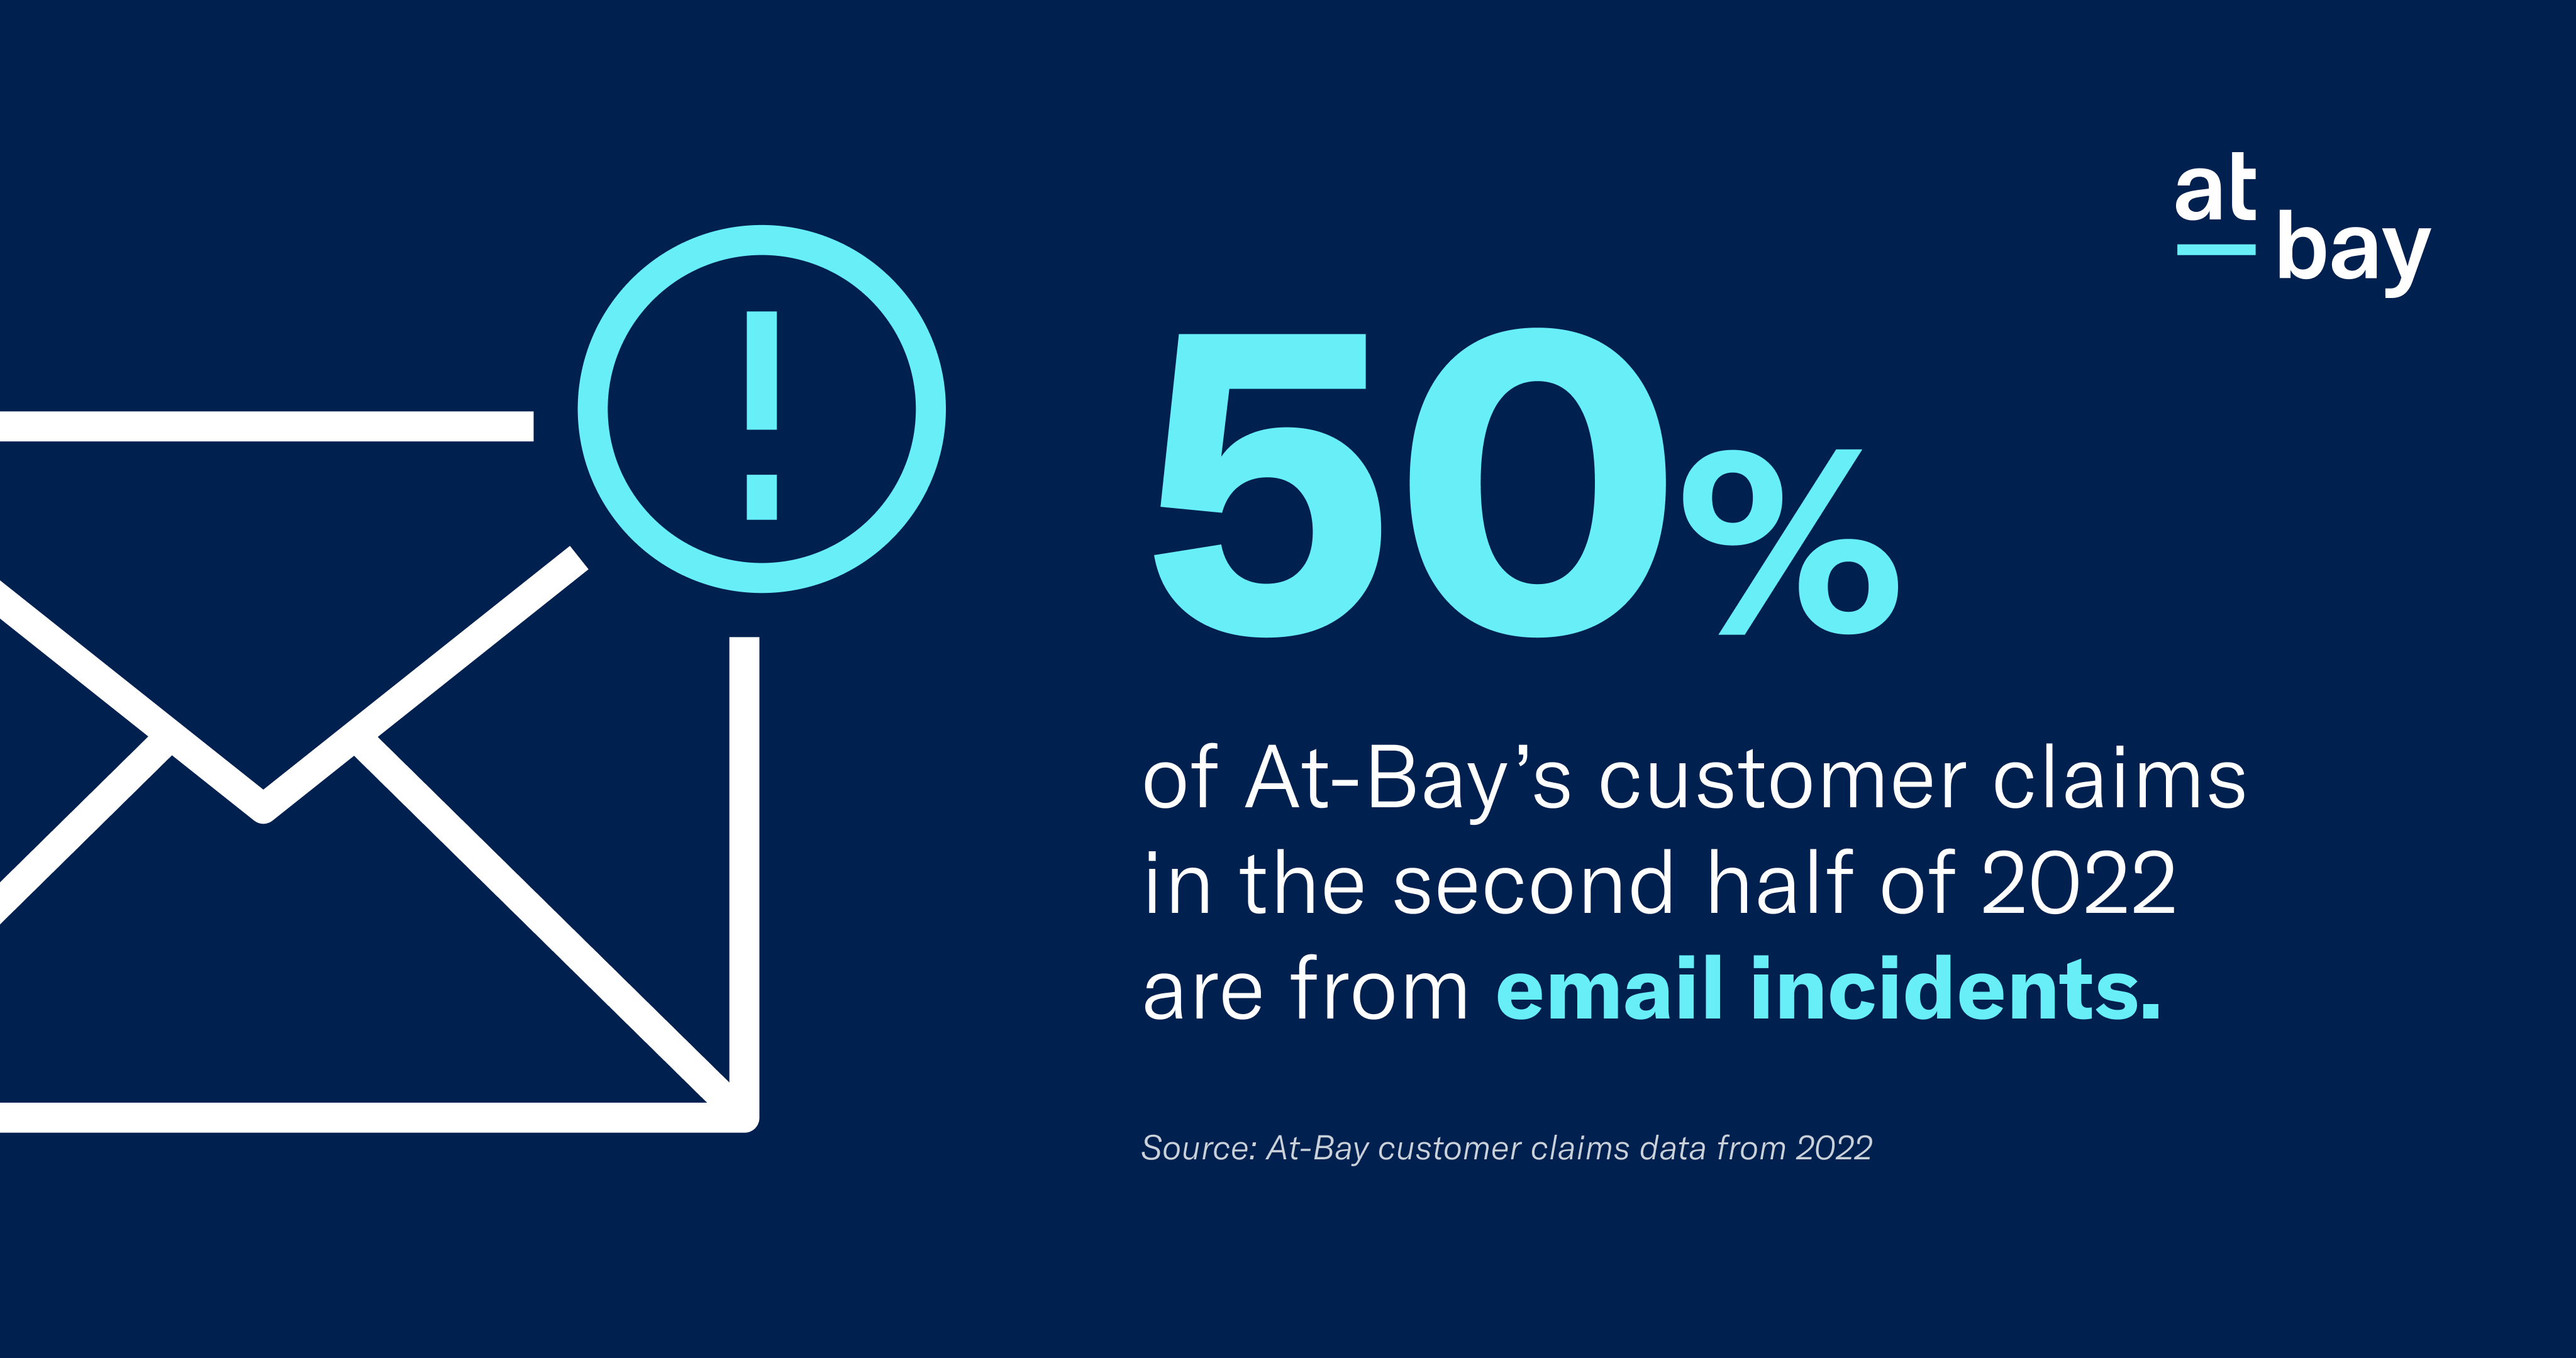 50% of At-Bay's customer claims in the second half of 2022 are from email incidents